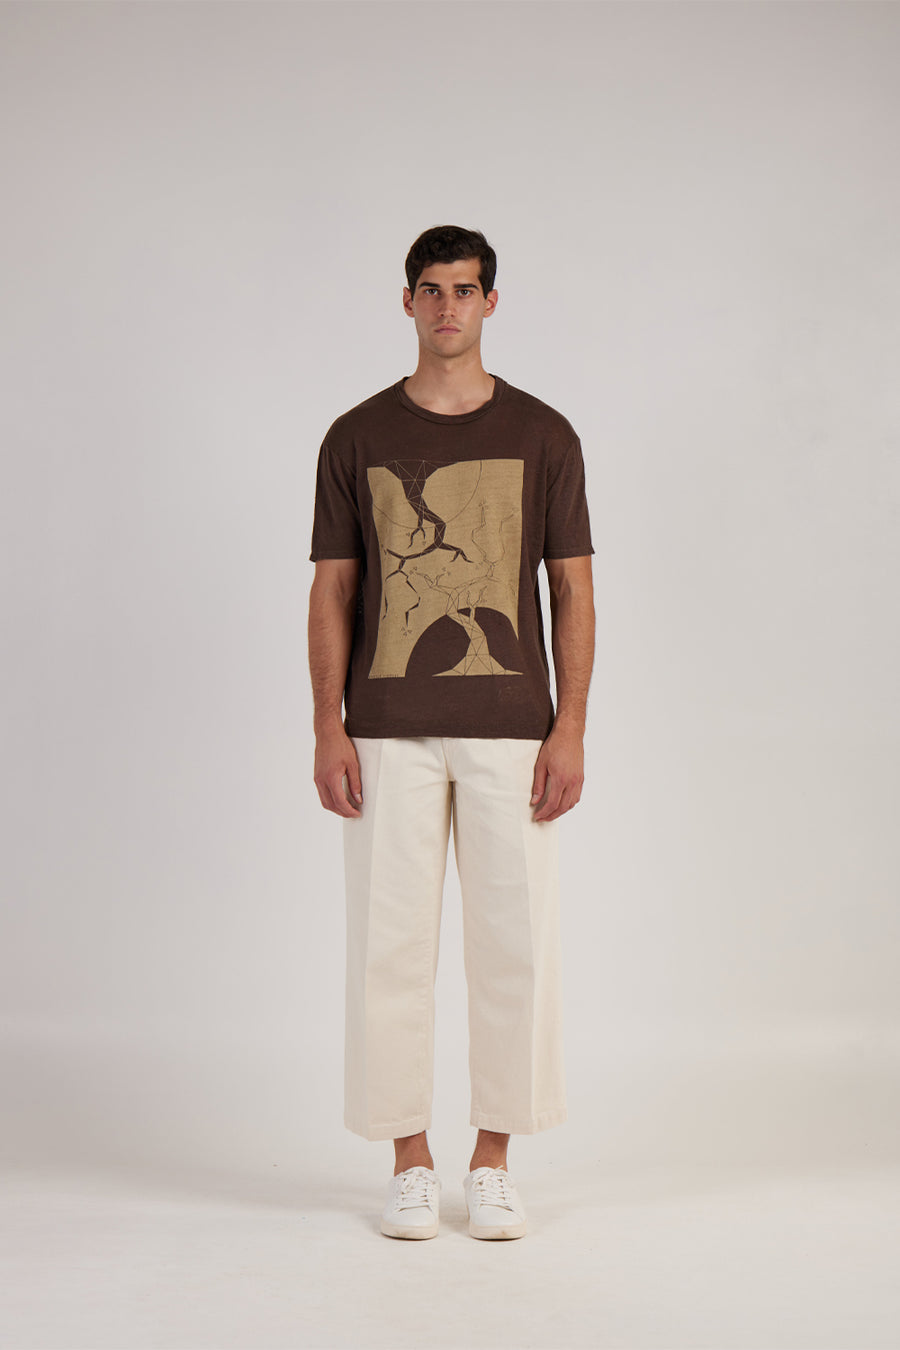 Buy the Daniele Fiesoli Linen Graphic T-Shirt in Brown at Intro. Spend £50 for free UK delivery. Official stockists. We ship worldwide.